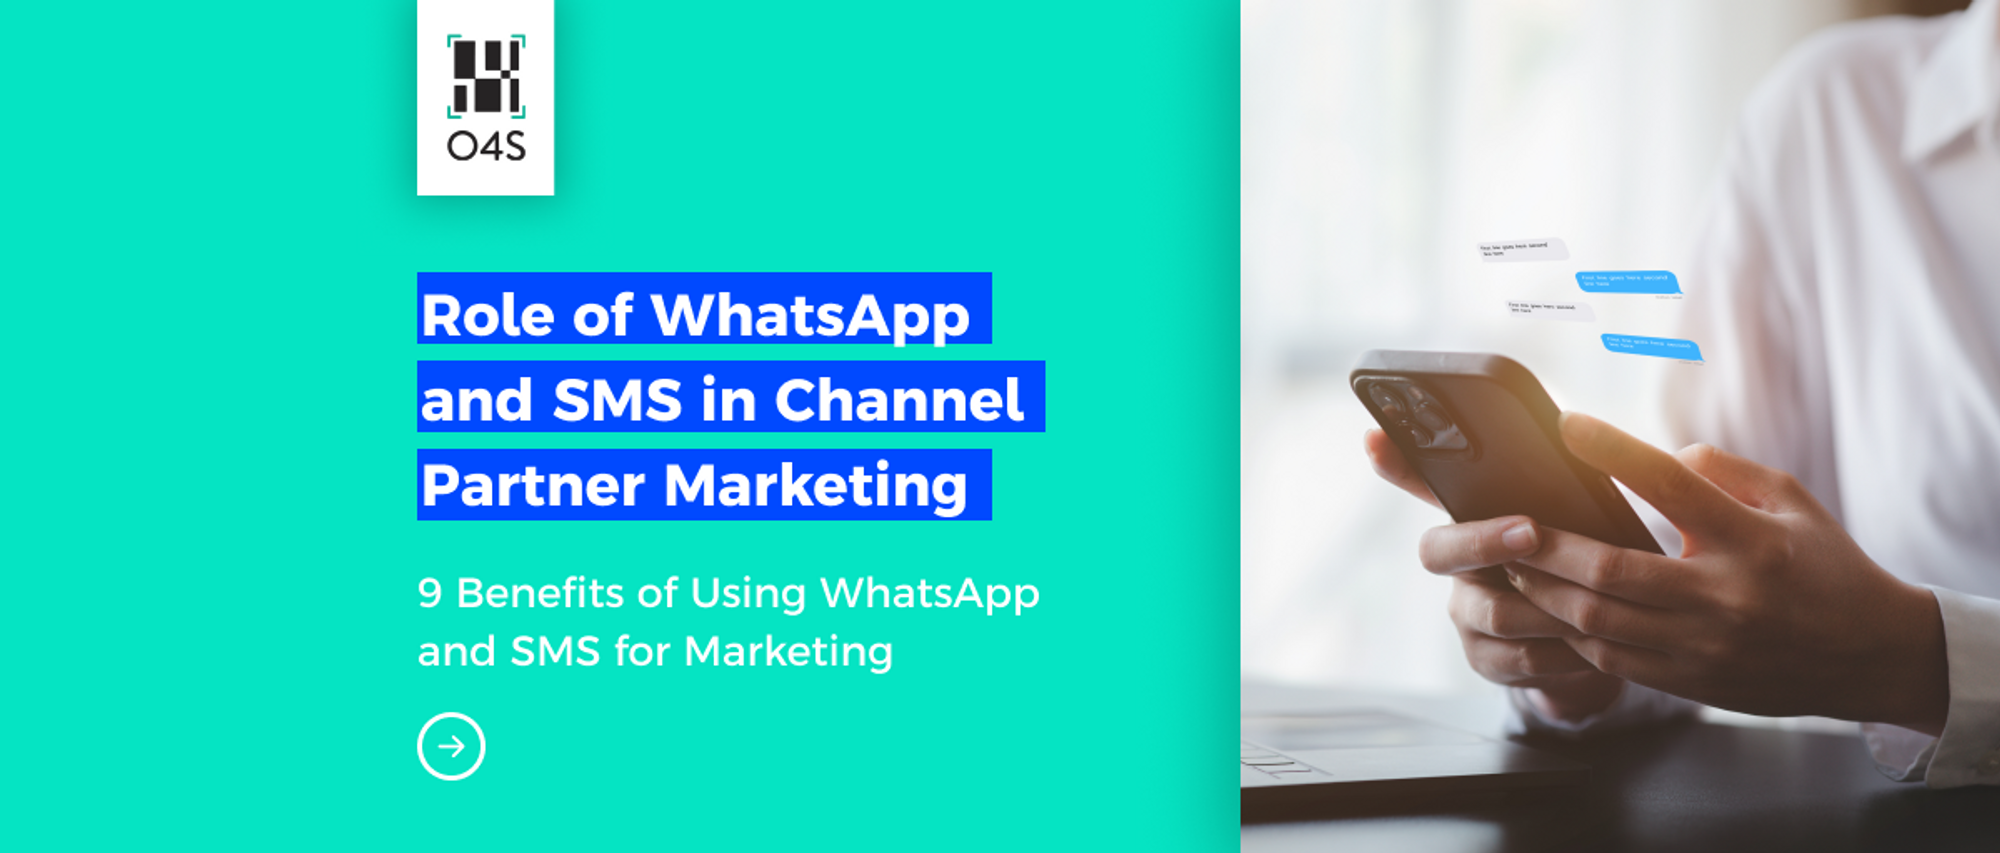 Role of WhatsApp and SMS in Channel Partner Marketing